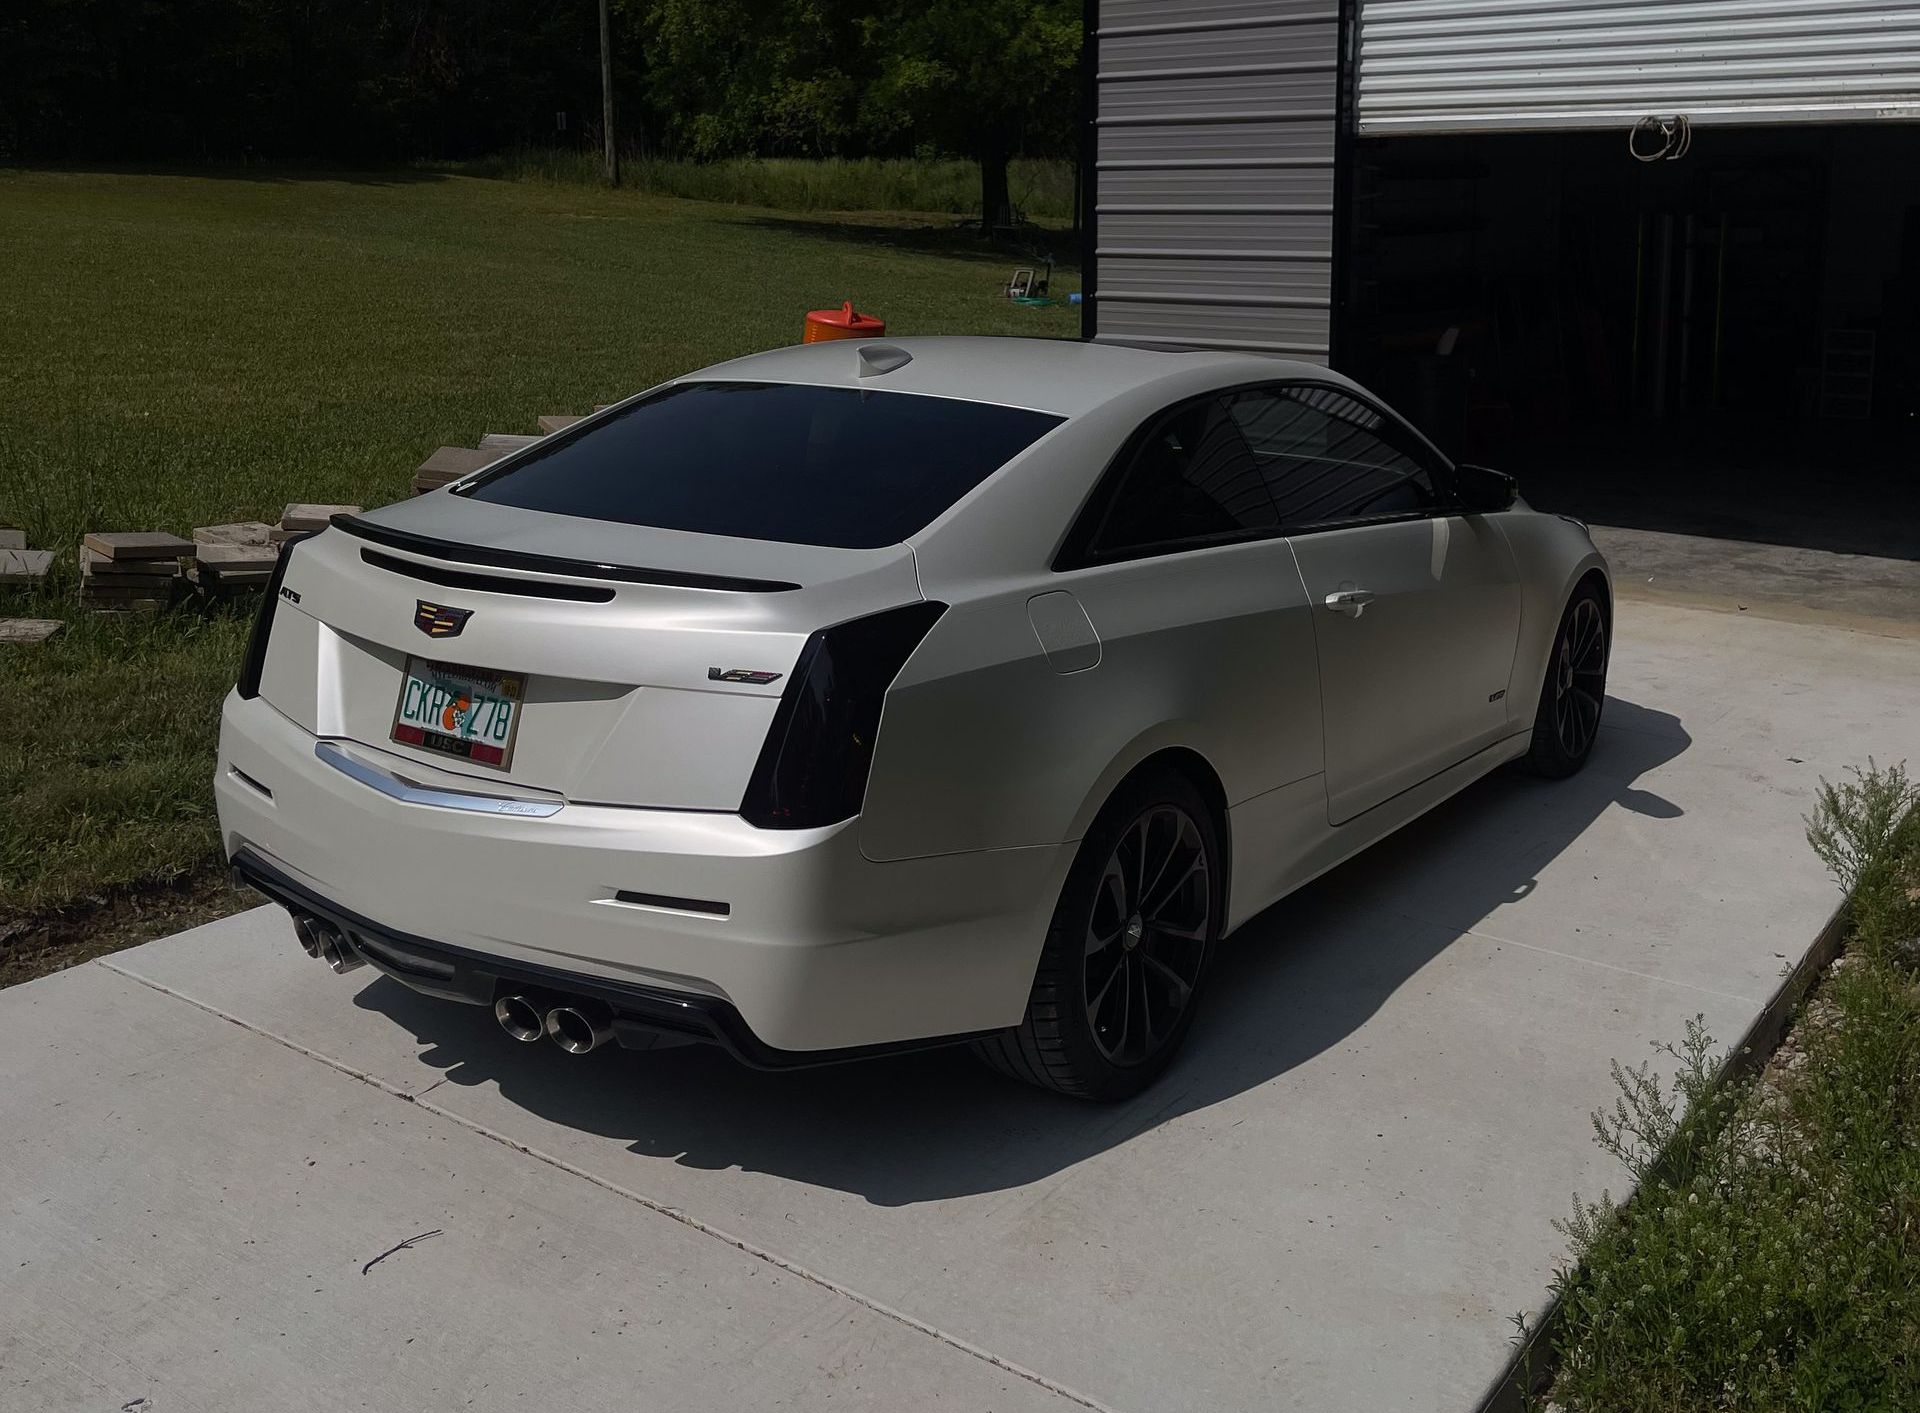 a white cadillac is parked in a driveway in front of a garage